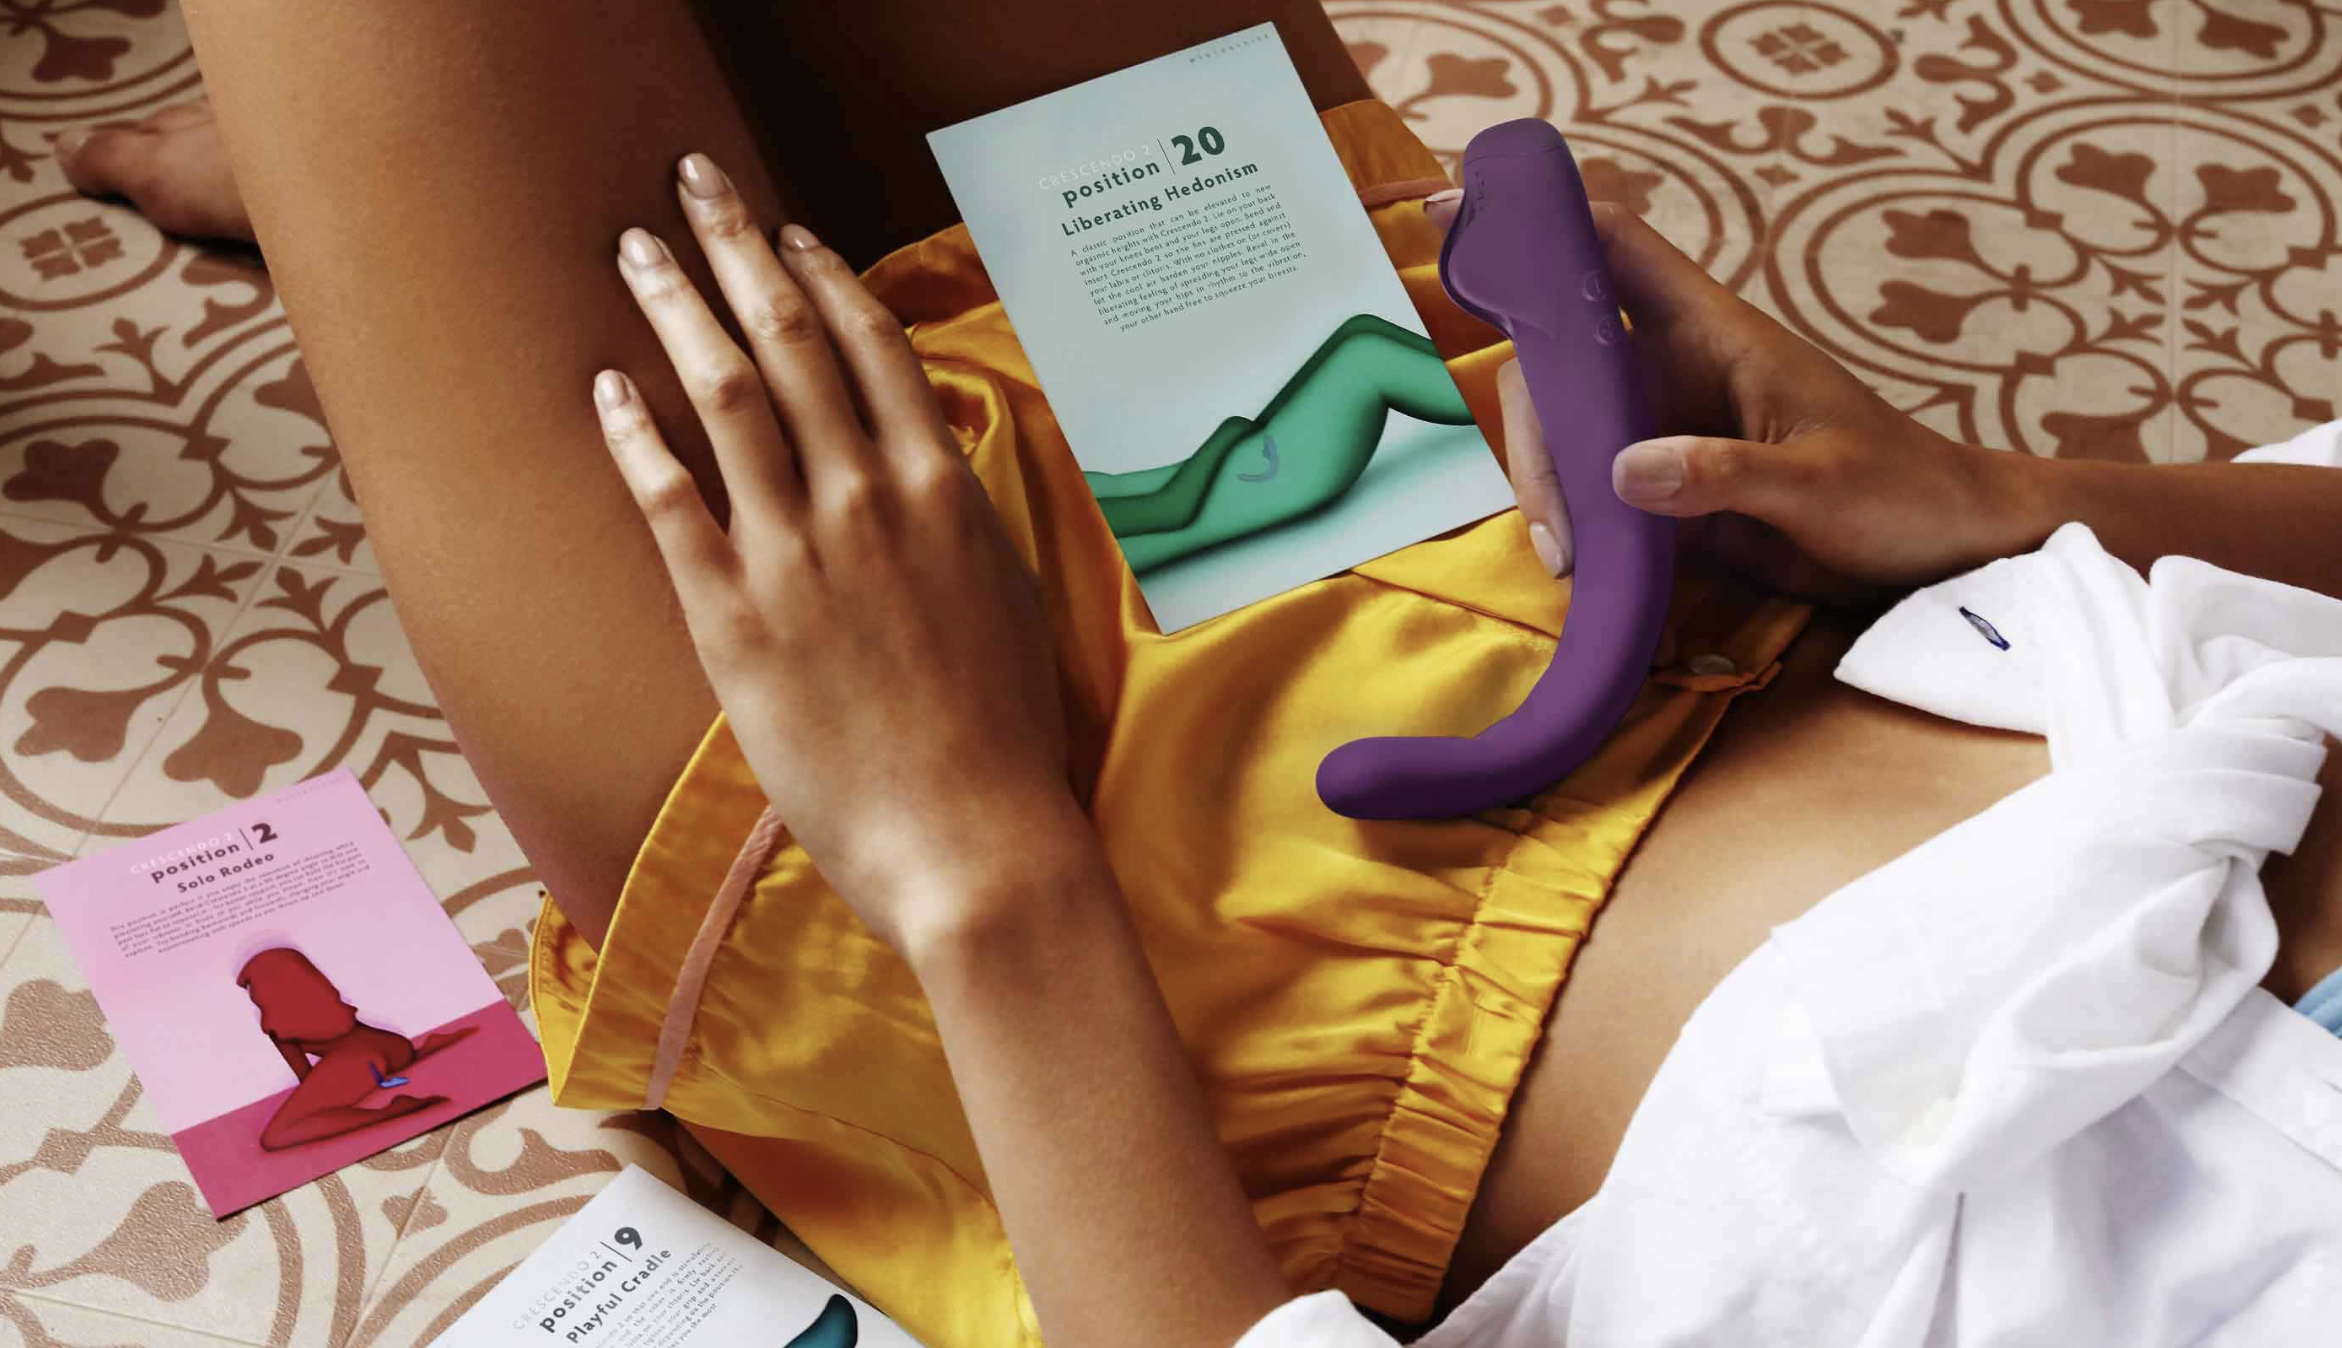 Coffee table book about the design of sex toys